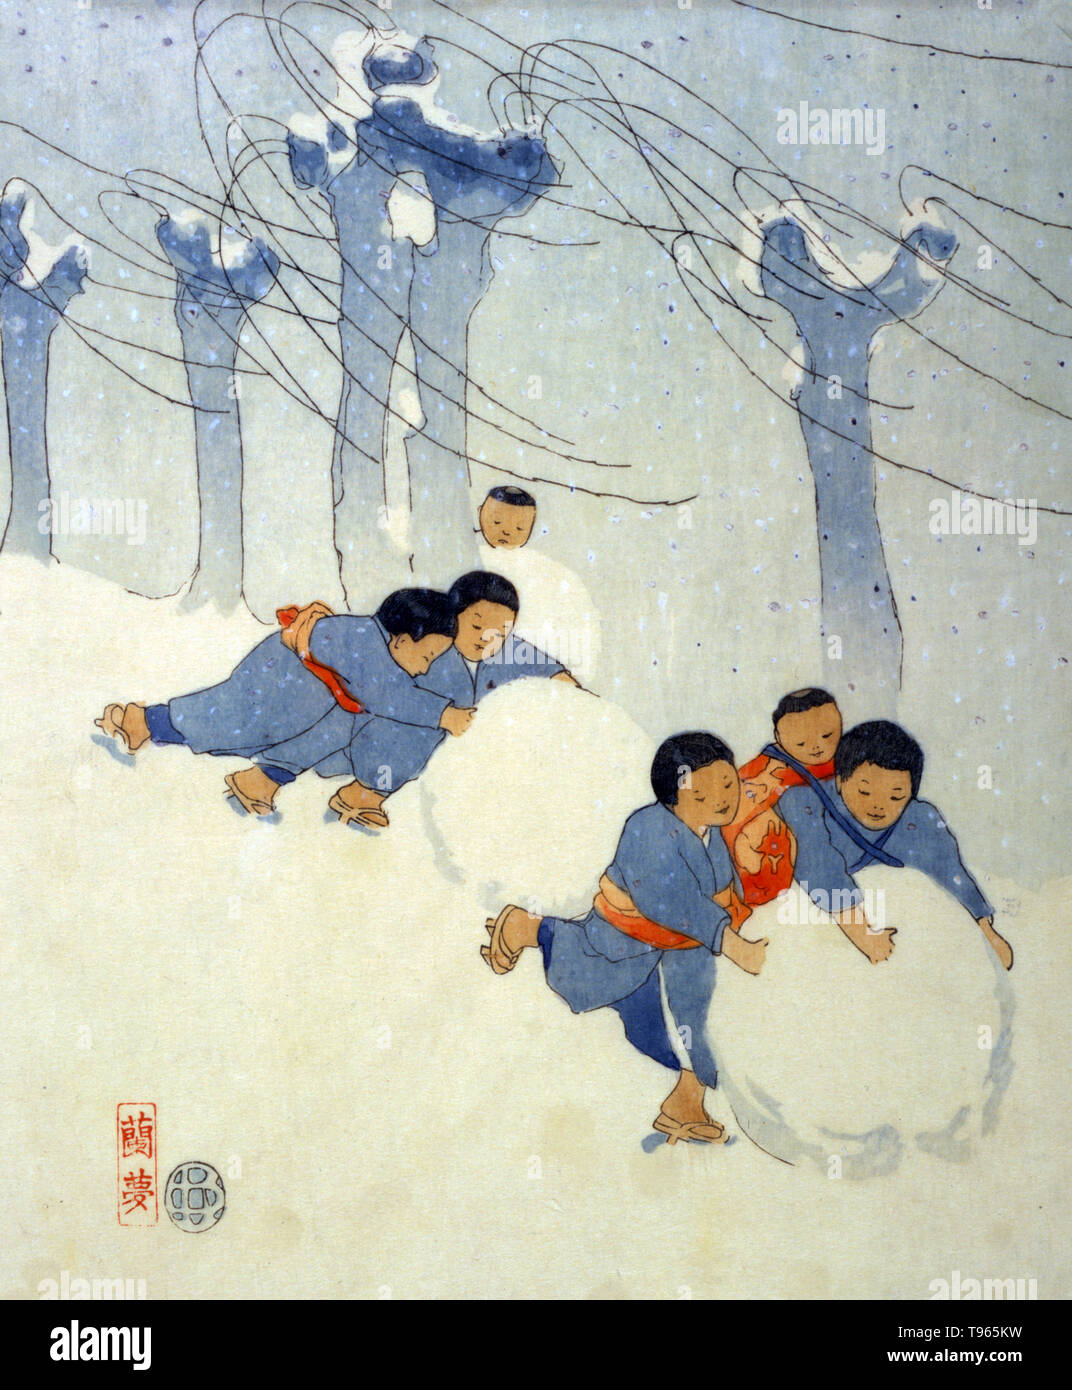 Japanese children rolling large snow balls. Ukiyo-e (picture of the floating world) is a genre of Japanese art which flourished from the 17th through 19th centuries. Ukiyo-e was central to forming the West's perception of Japanese art in the late 19th century. The landscape genre has come to dominate Western perceptions of ukiyo-e, though ukiyo-e had a long history preceding these late-era masters. Stock Photo